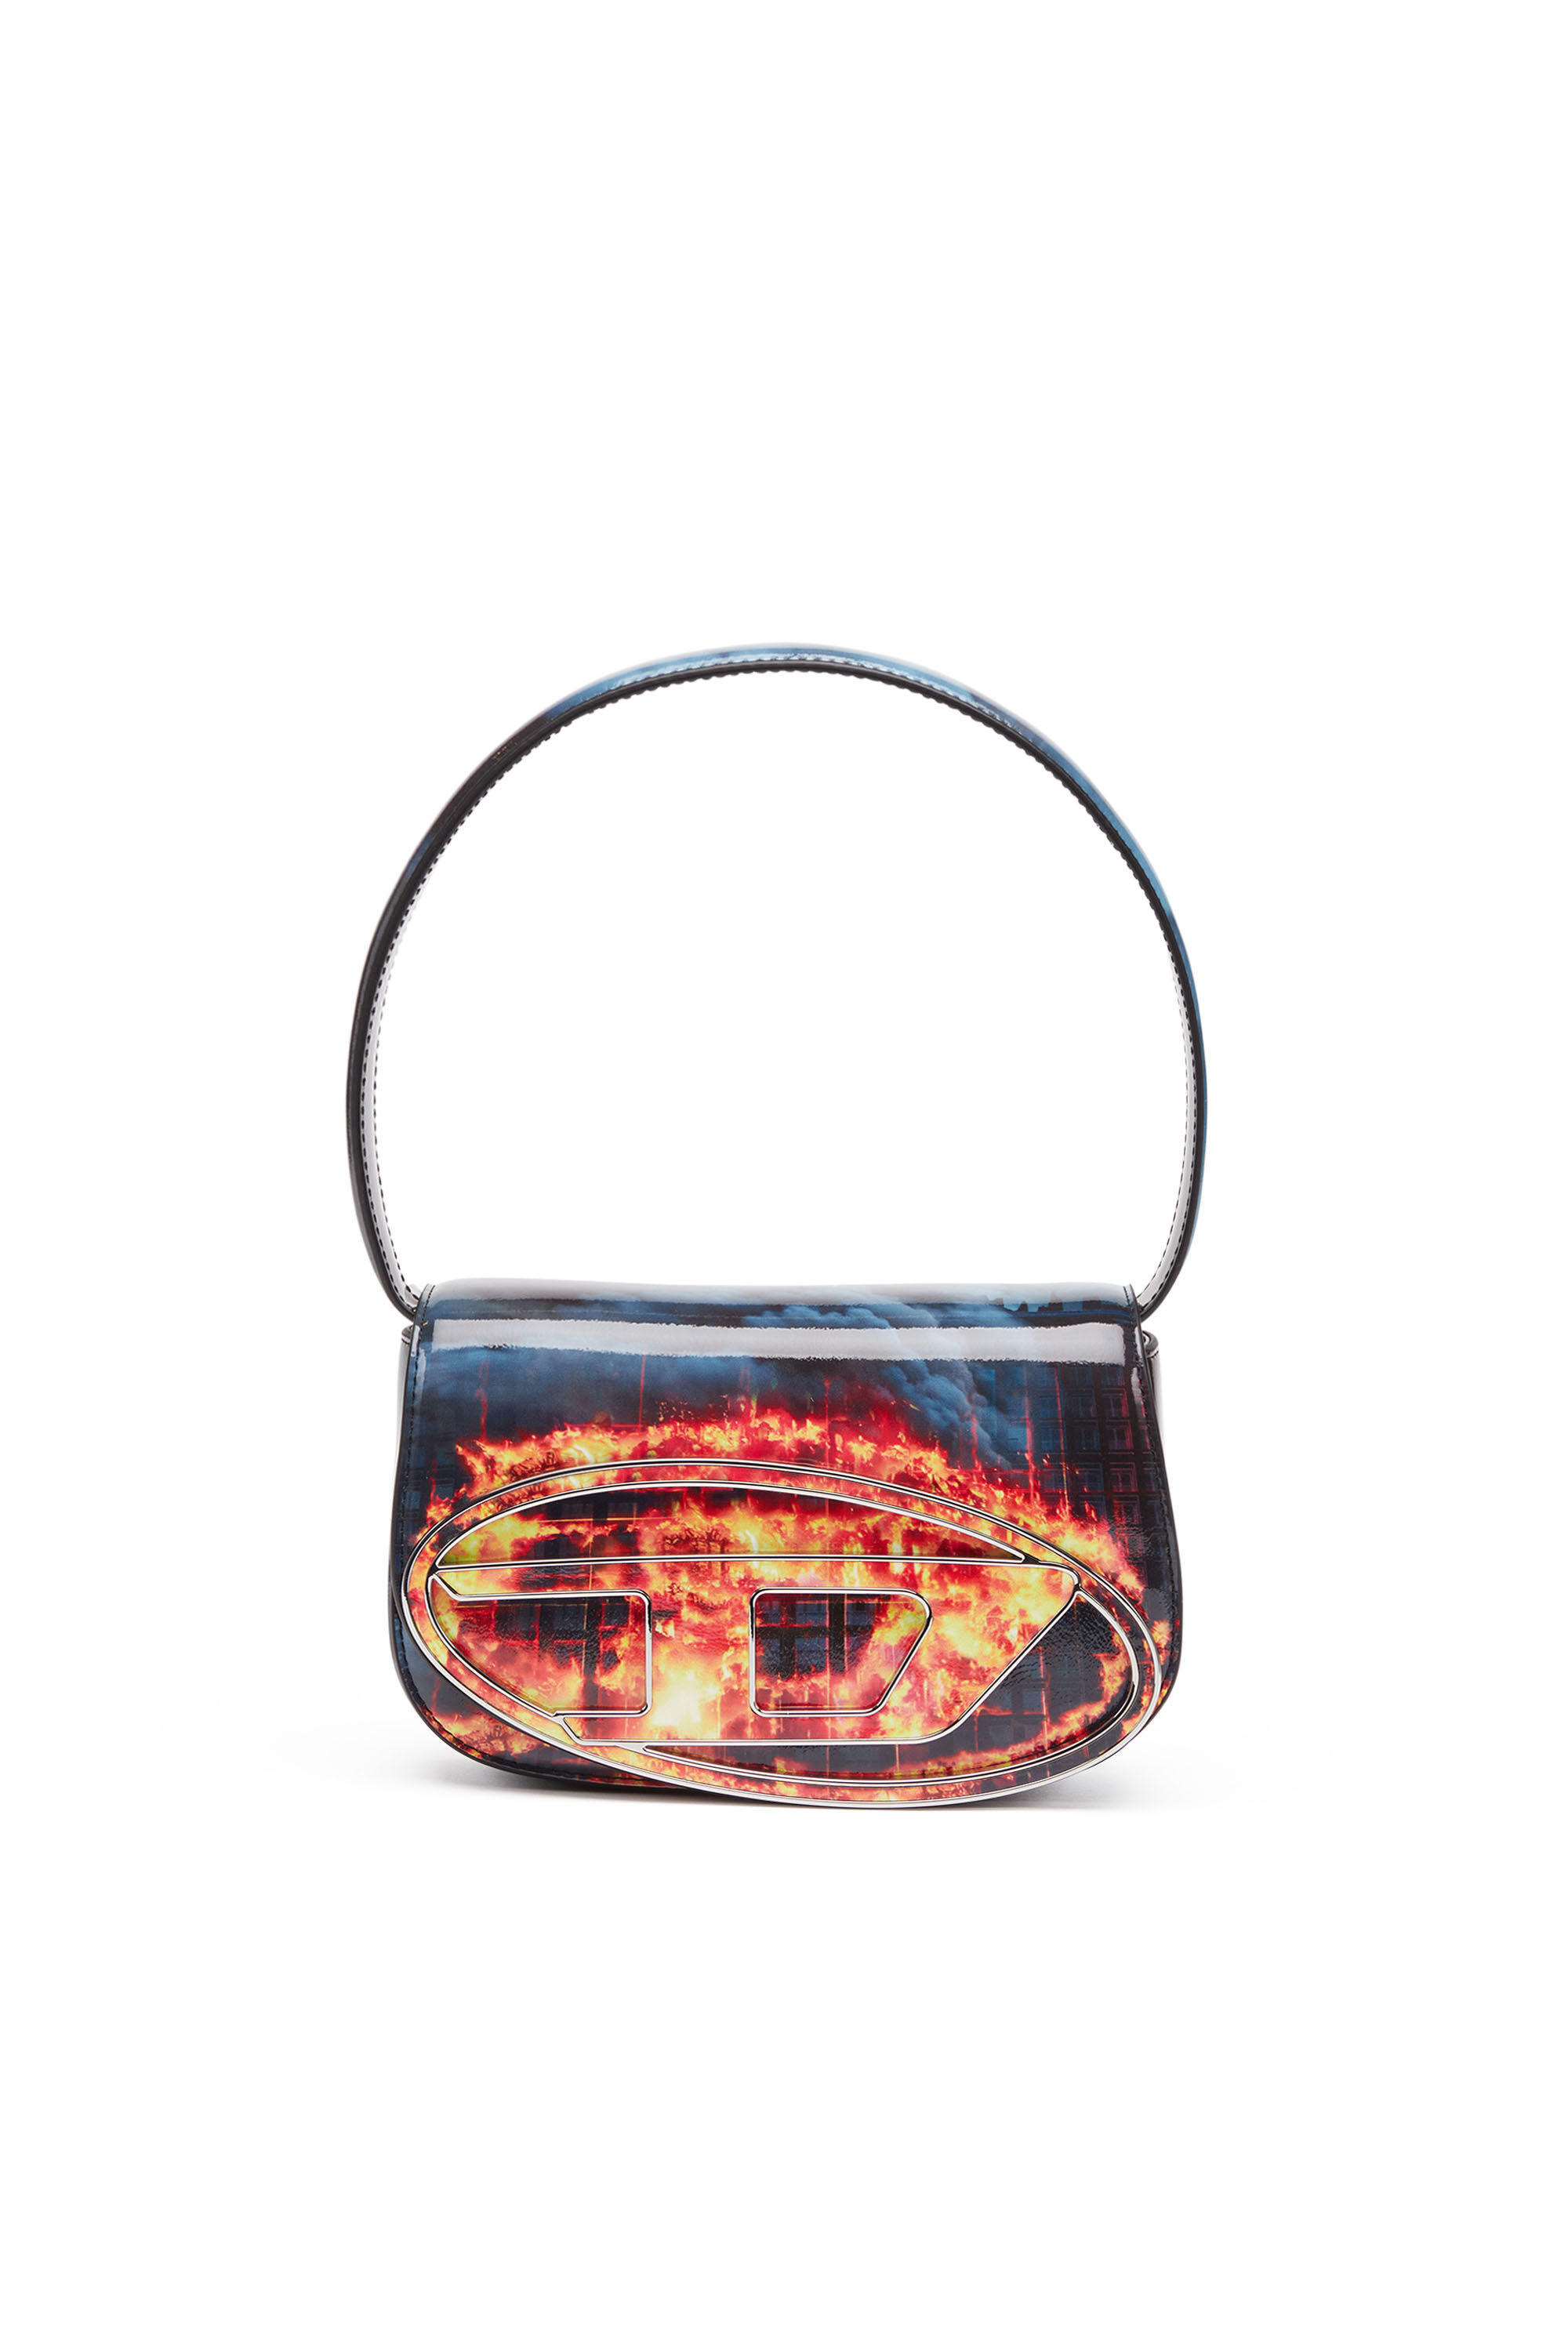 1DR 1DR - Iconic shoulder bag with fire print｜マルチカラー ...